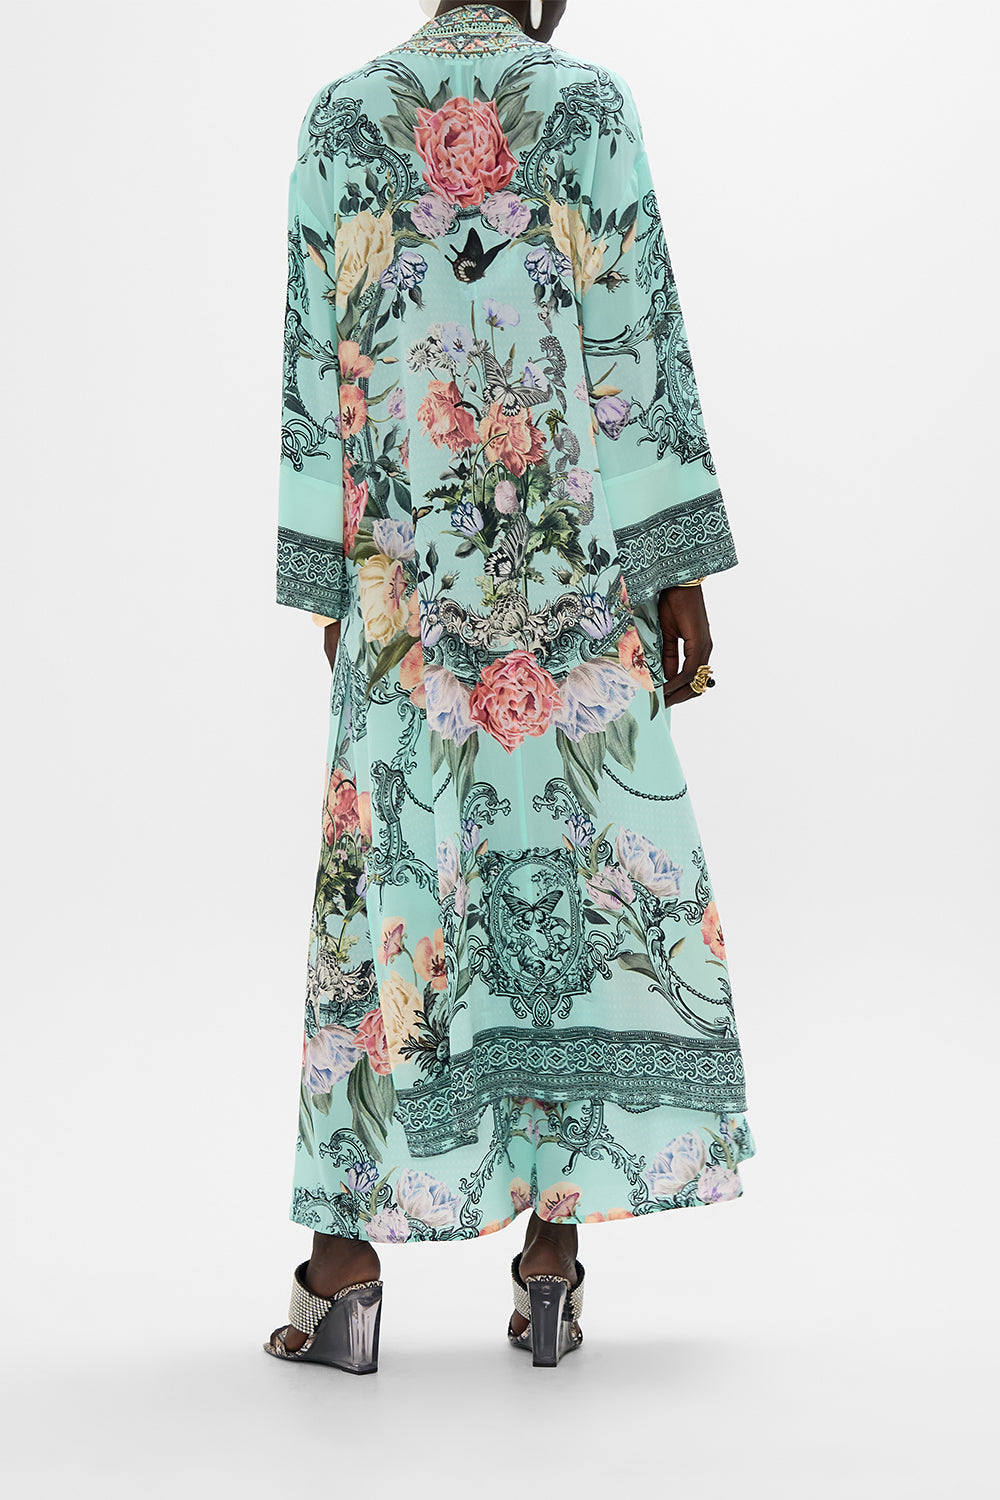 CAMILLA Floral Long Layer with Neckbands in Petal Promise Land